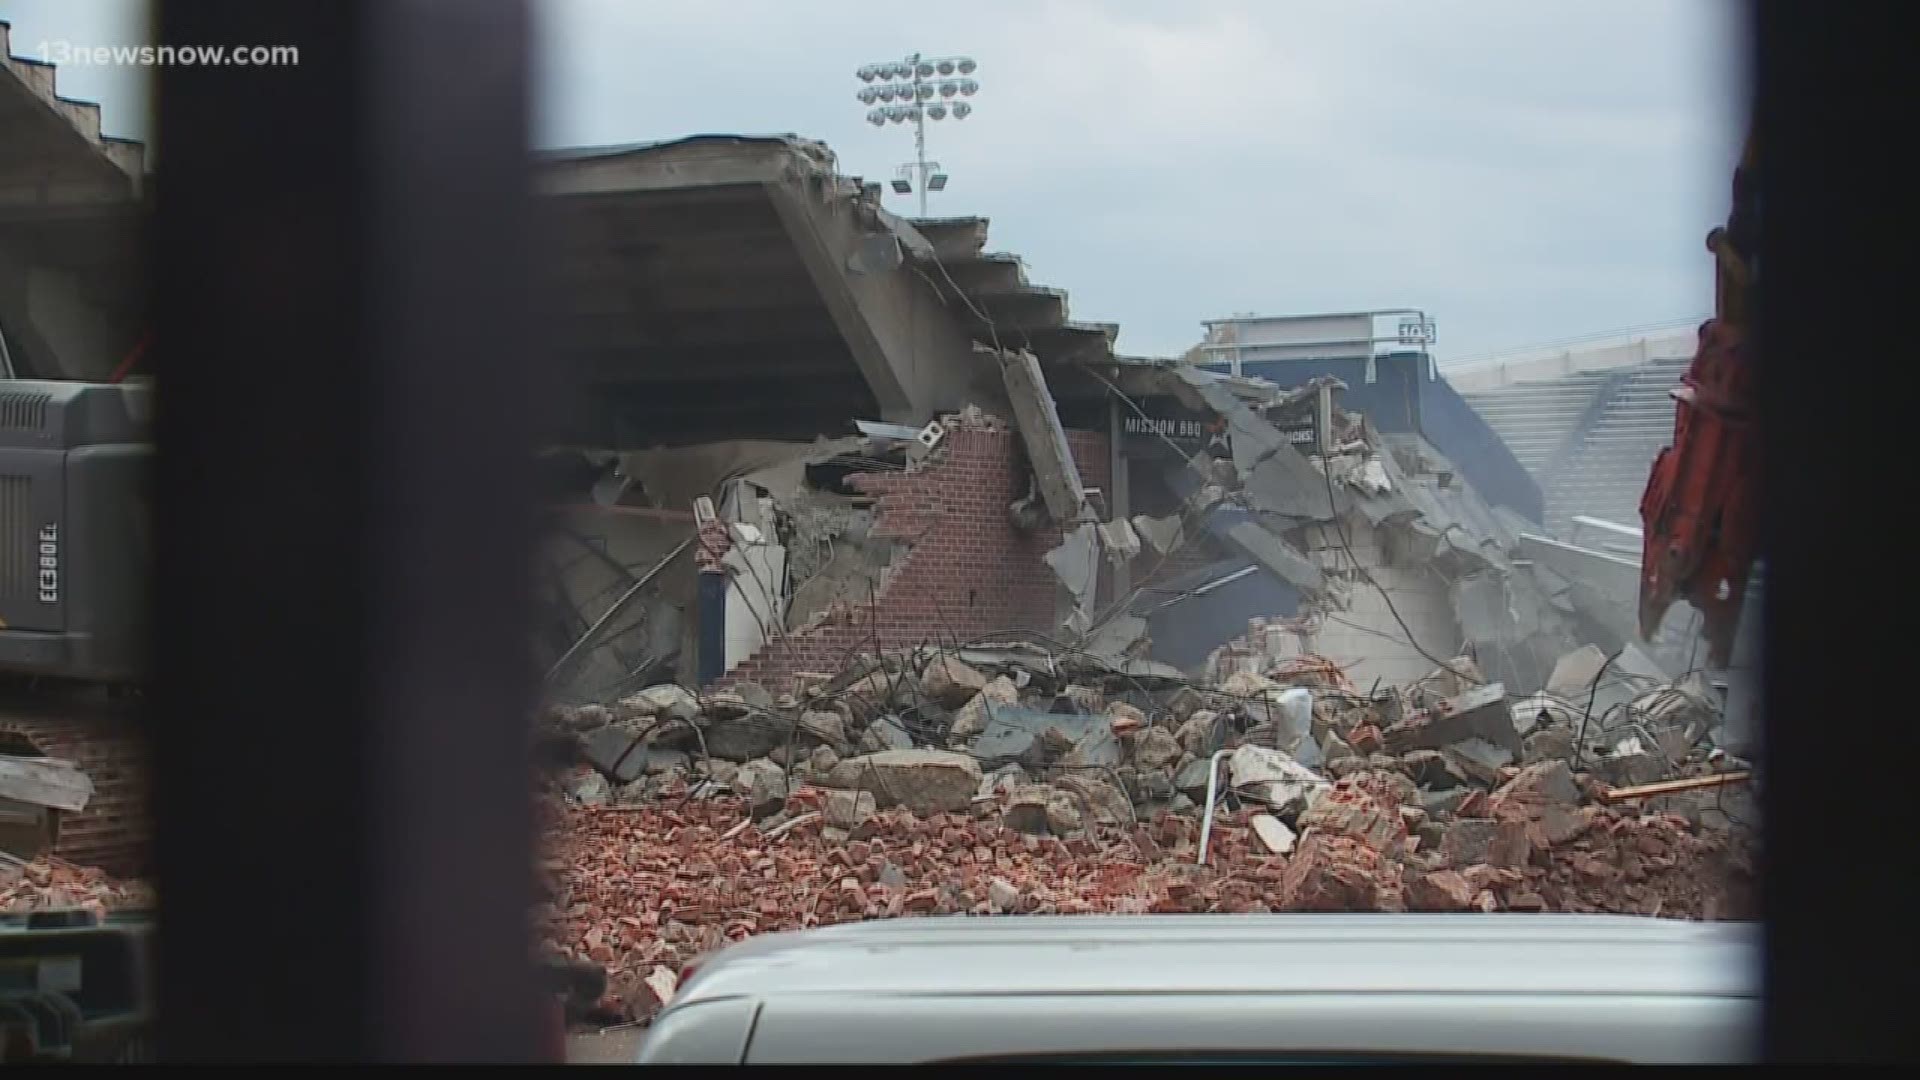 Foreman Field at Old Dominion University is being demolished.